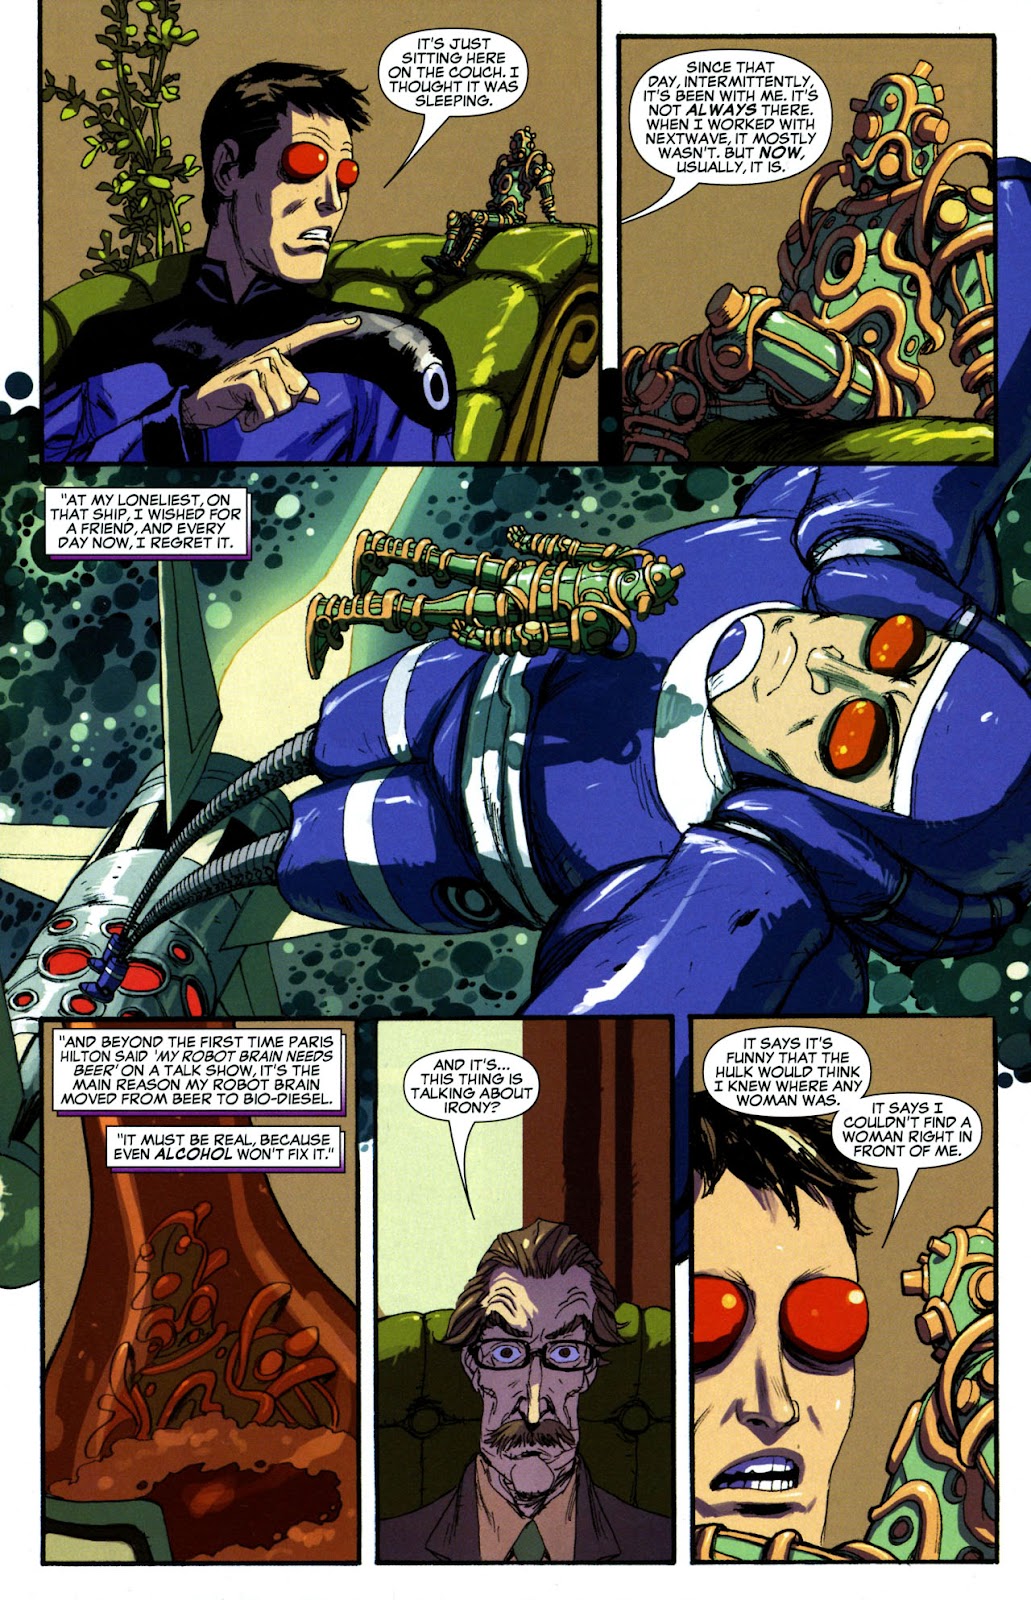 Marvel Comics Presents (2007) issue 9 - Page 15